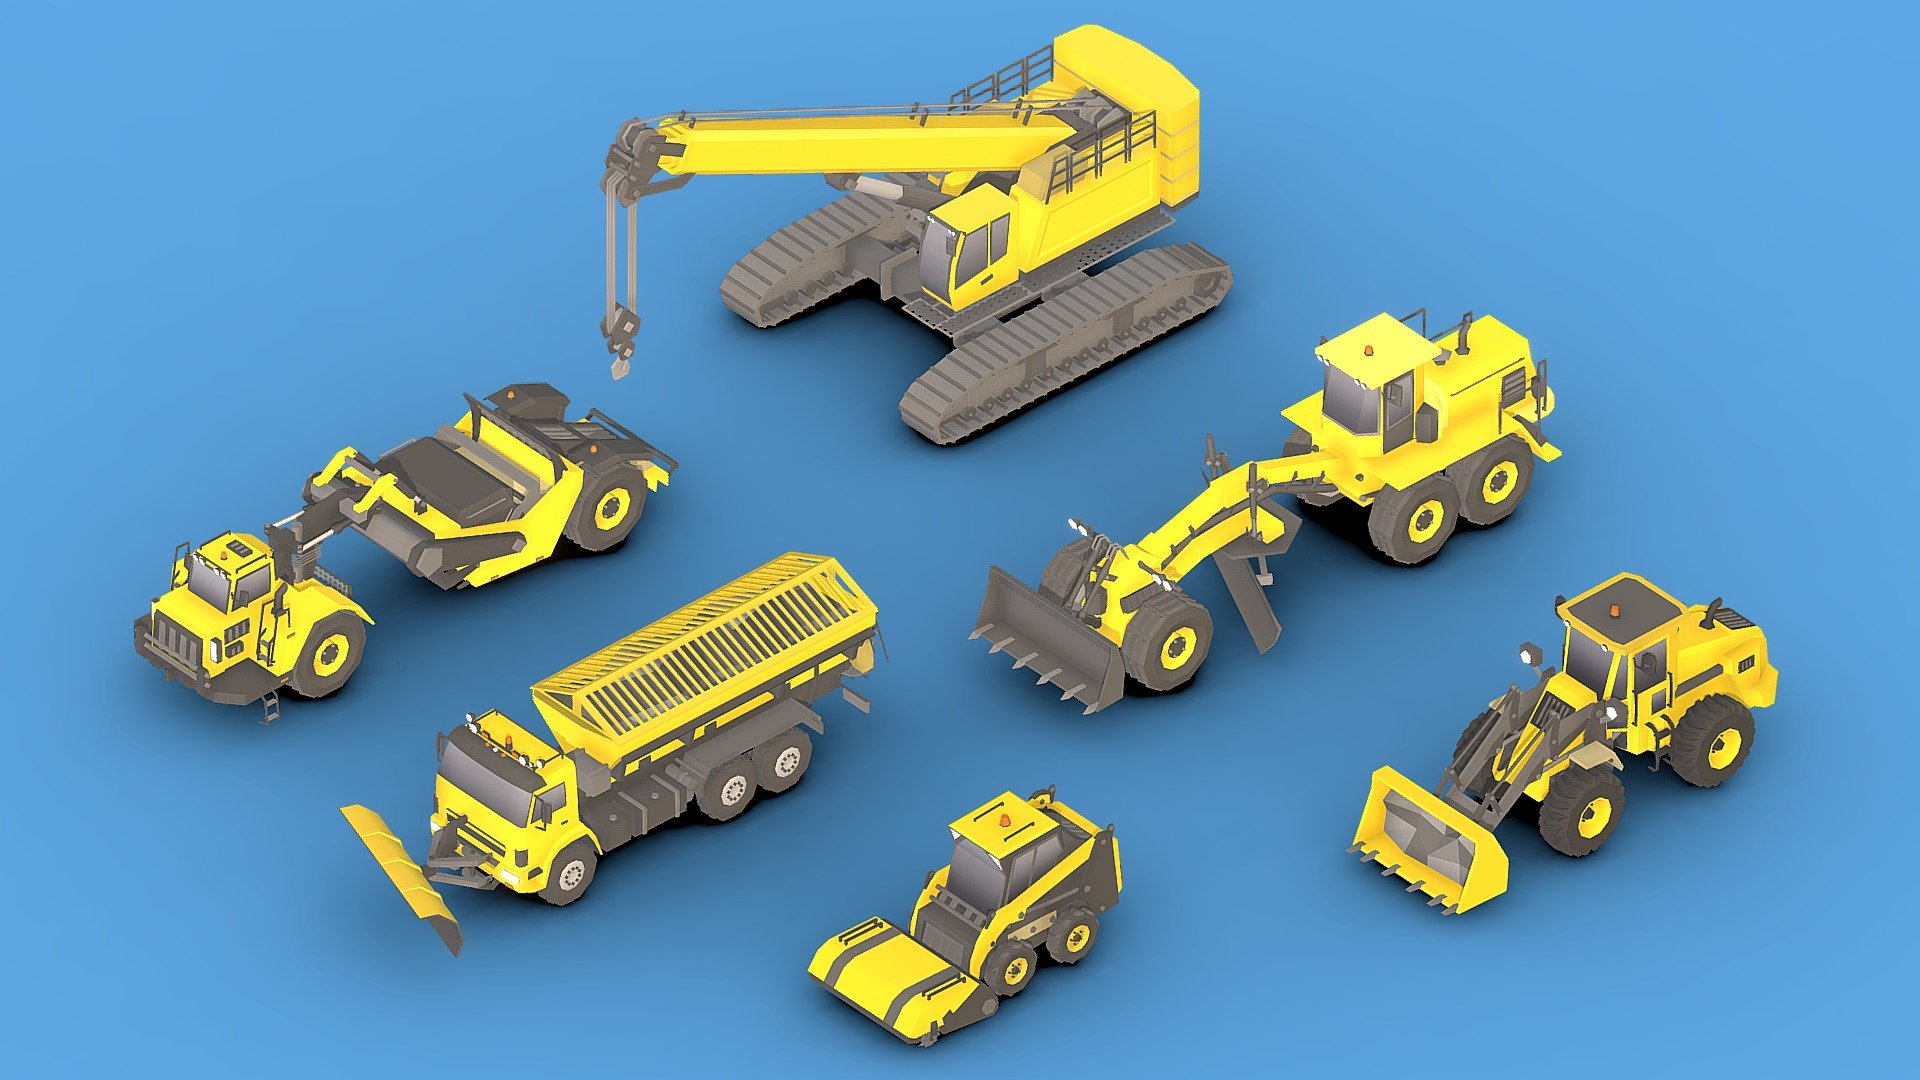 Collection Construction Vehicles Low- Poly_2

This package includes 6 vehicles.

You can use these models in any game and project.

This model is made with order and precision.

Textures format is PNG.

Separated parts (body. wheels).

Very low poly.

Low poly (Mobile Optimized).

Vehicles have separate parts.

Average poly count: 3/000 Tris.

Texture size: 256(PNG).

Each model has 1 textures .

Each model has 1 materials .

The parts are separated.

format: fbx, obj, 3d max - Collection Construction Vehicles Low- Poly_2 - Buy Royalty Free 3D model by Sidra (@Sidramax) 3d model